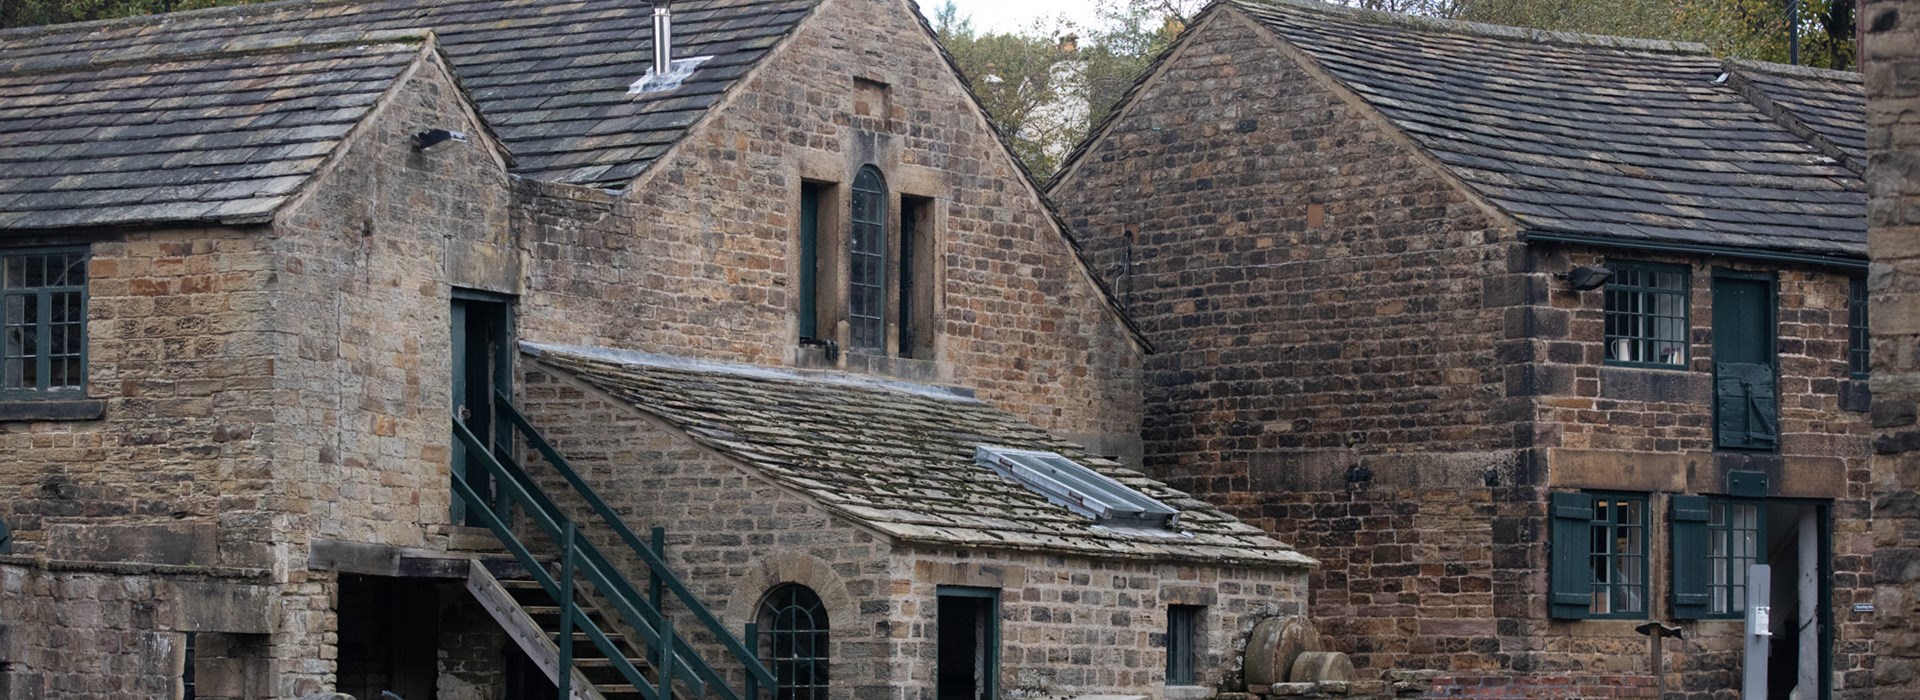 A collection of historic industrial stone buildings. They have large green windows and the building to the left has steps leading up to the second storey. There are trees behind.